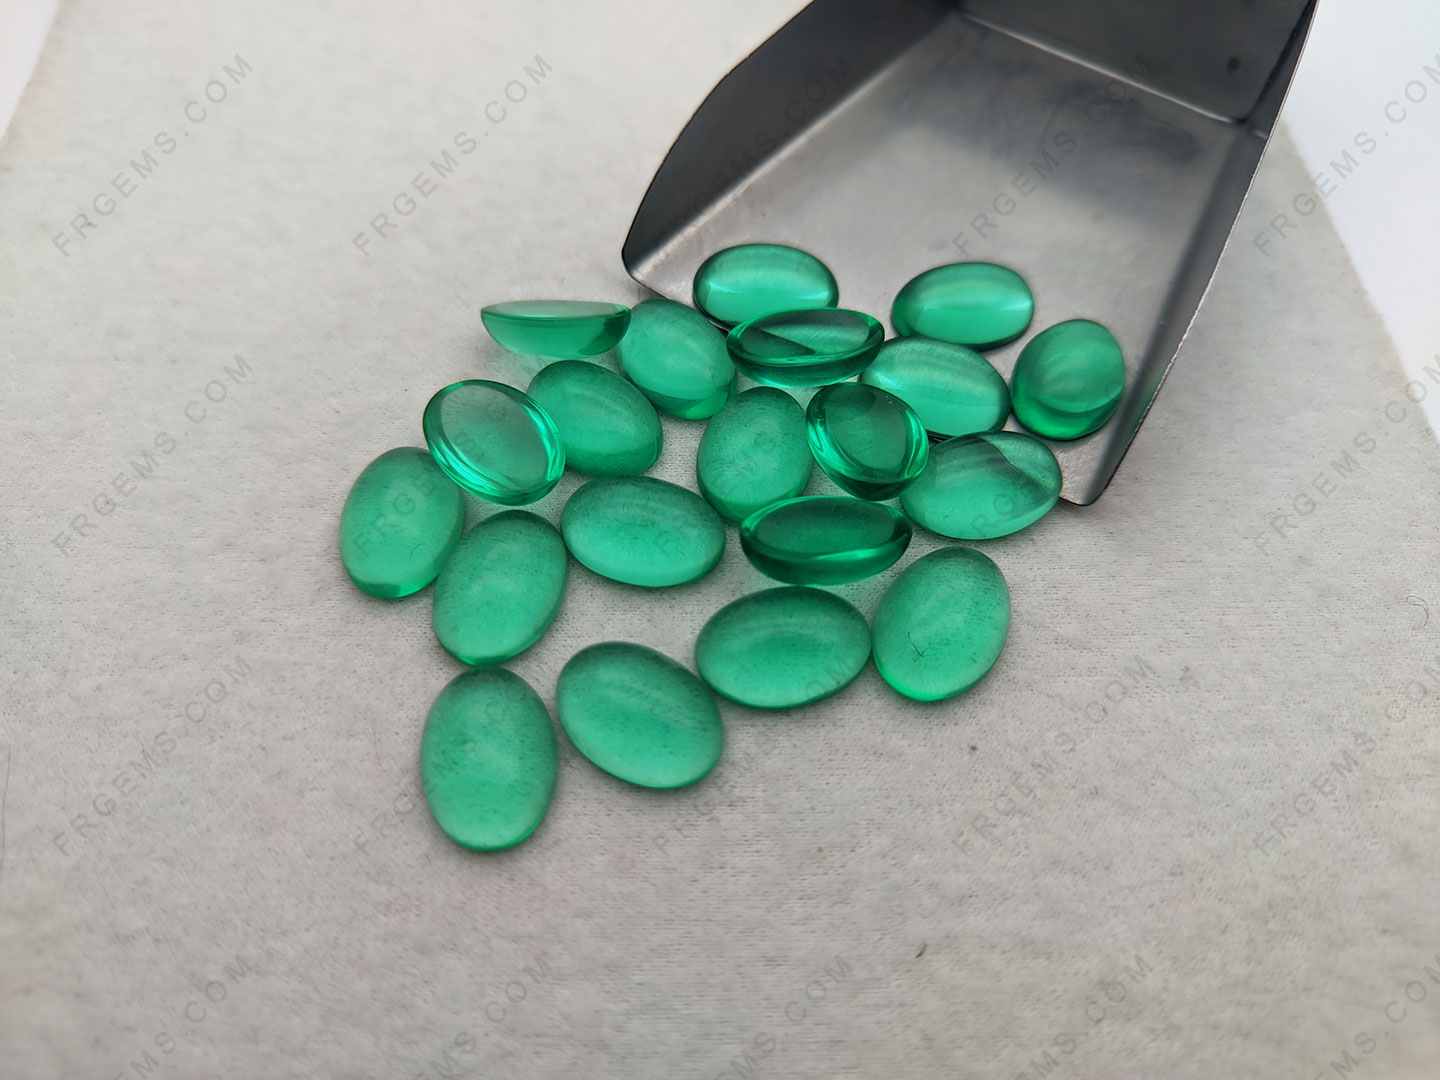 wholesale Glass Emerald Green blueish Color Oval Shape Cabochon Loose Gemstones